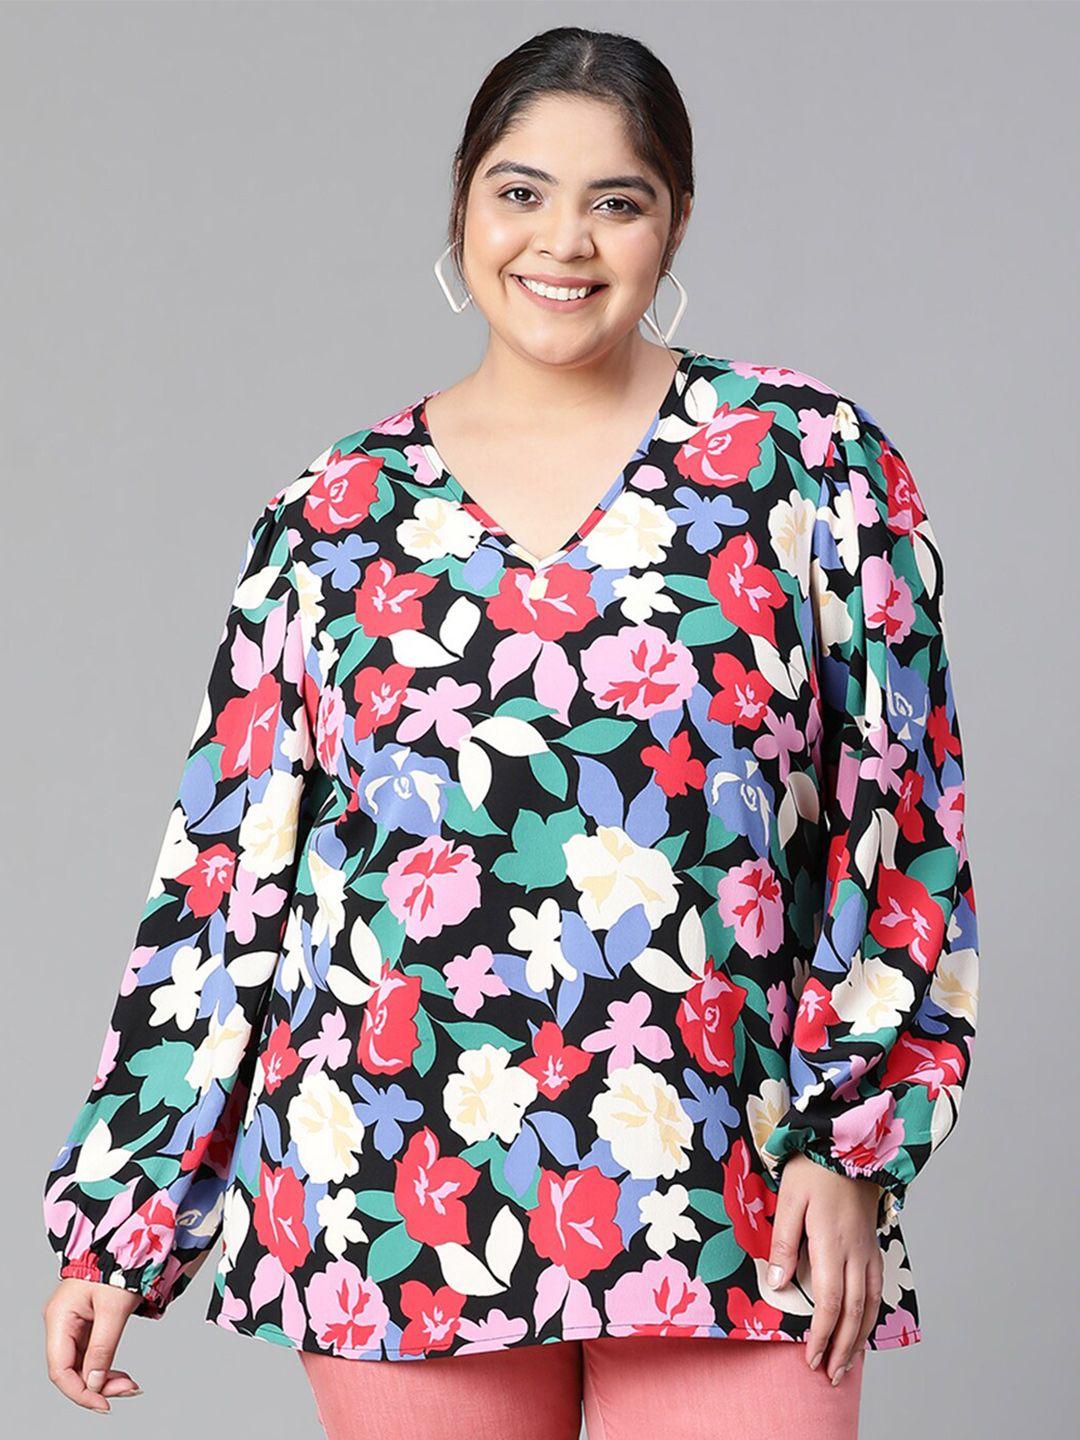 oxolloxo plus size floral printed shirt style top